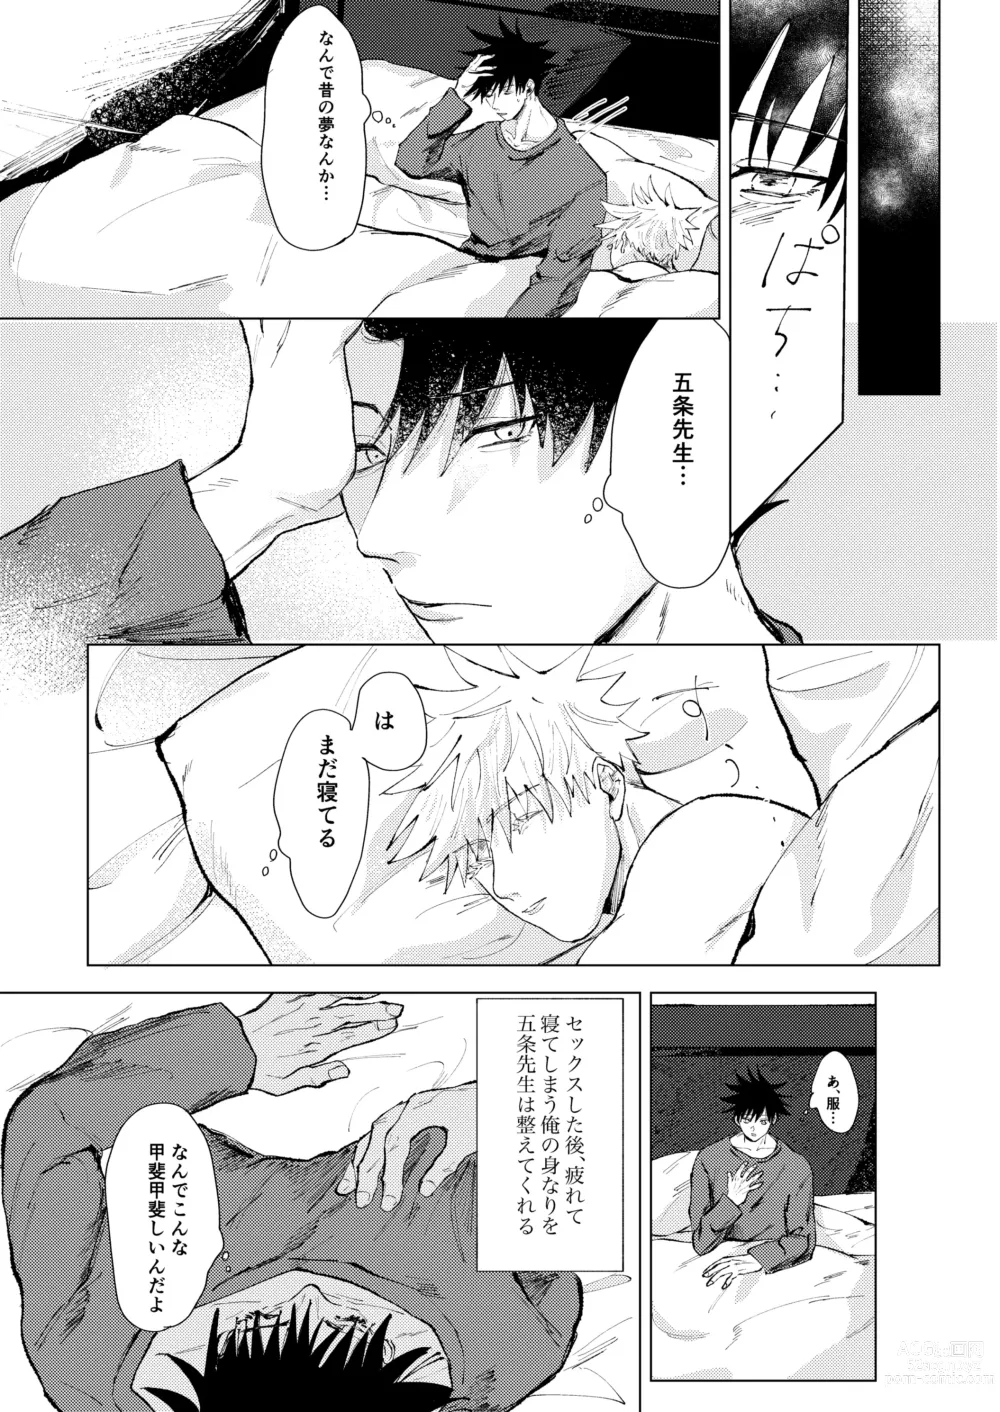 Page 7 of doujinshi Lack of...